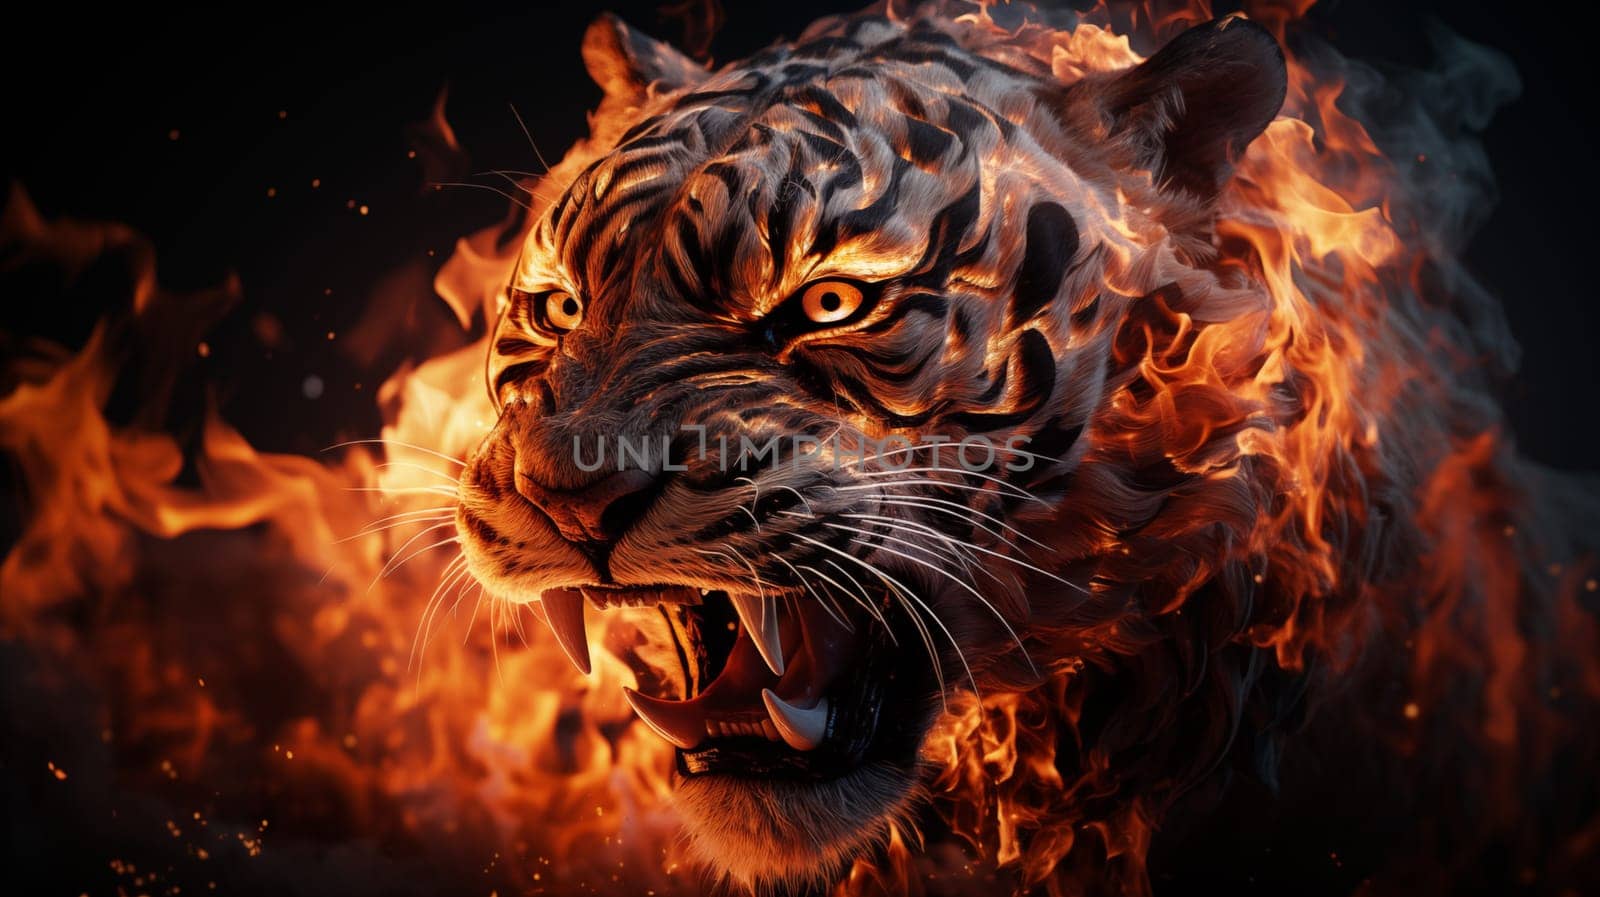 Head of an angry, fiery tiger, with open mouth and burning eyes, on a black background.